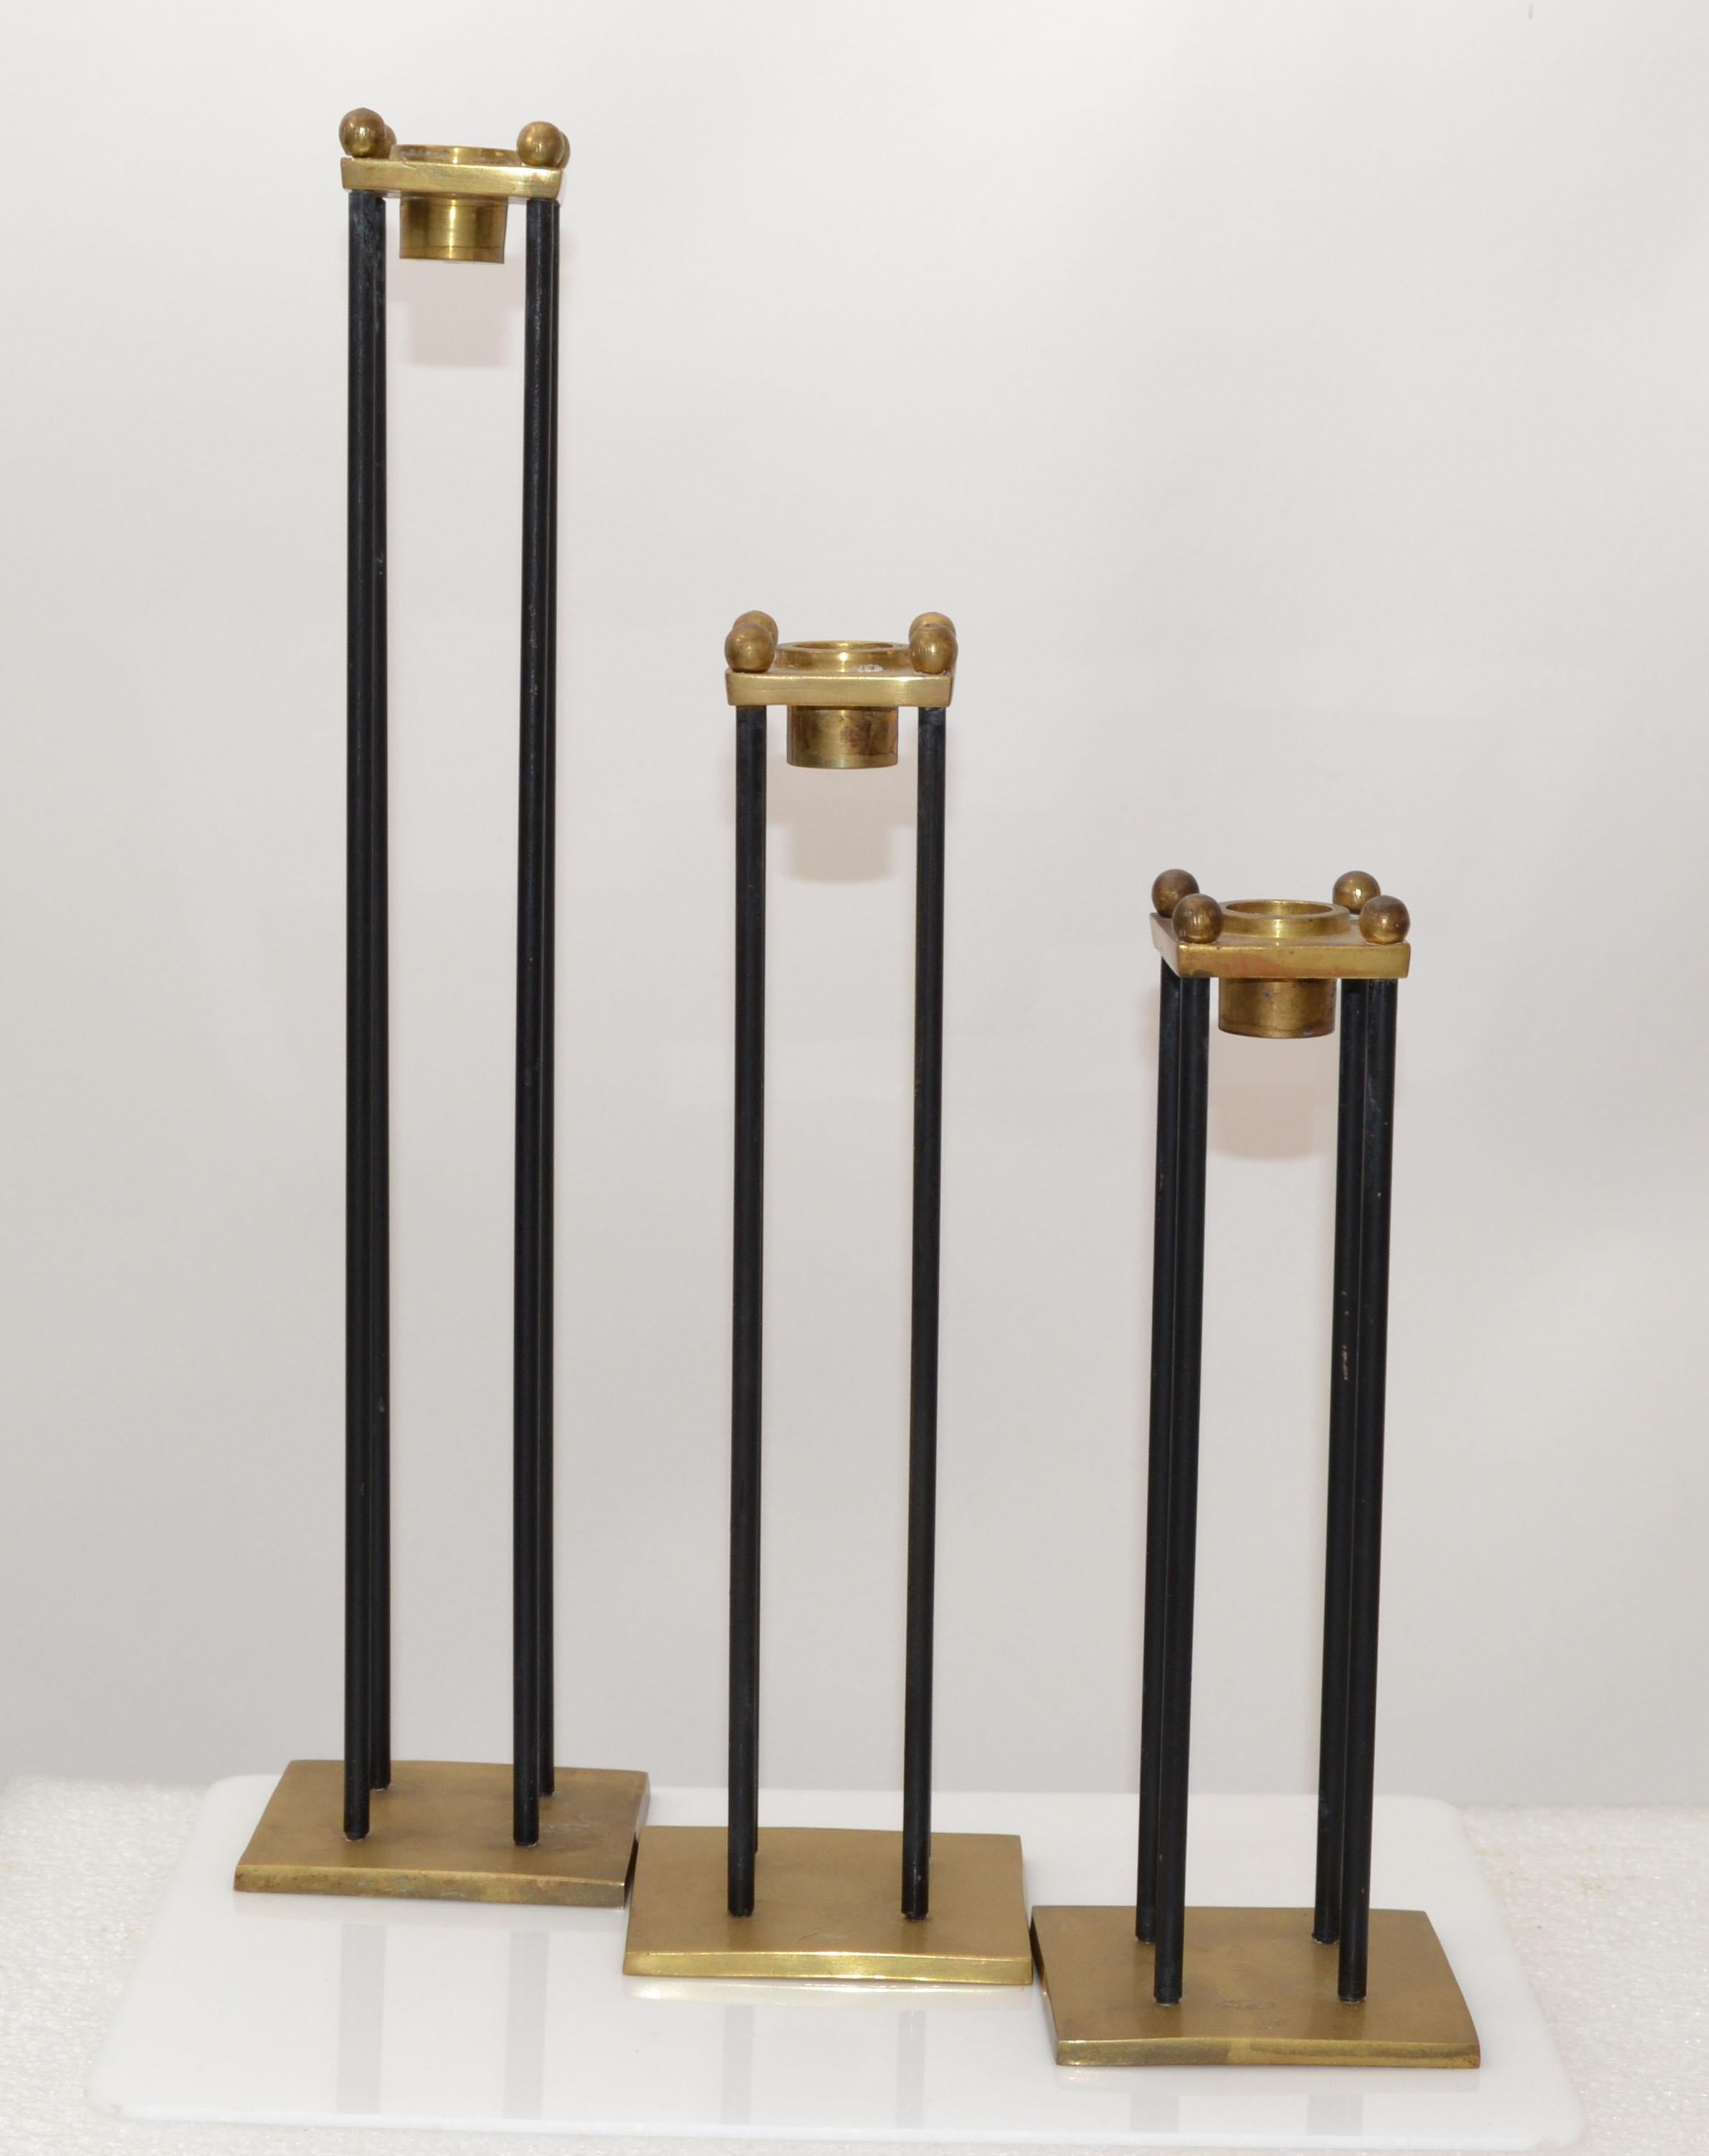 Set of three Nesting Mid-Century Modern black Enamel and Brass candle holders or candlesticks.
The set is very old and we intentionally left the brass in its original condition.
They come in three sizes: 15.5 inches, 11.5 inches, 9.5 inches height.